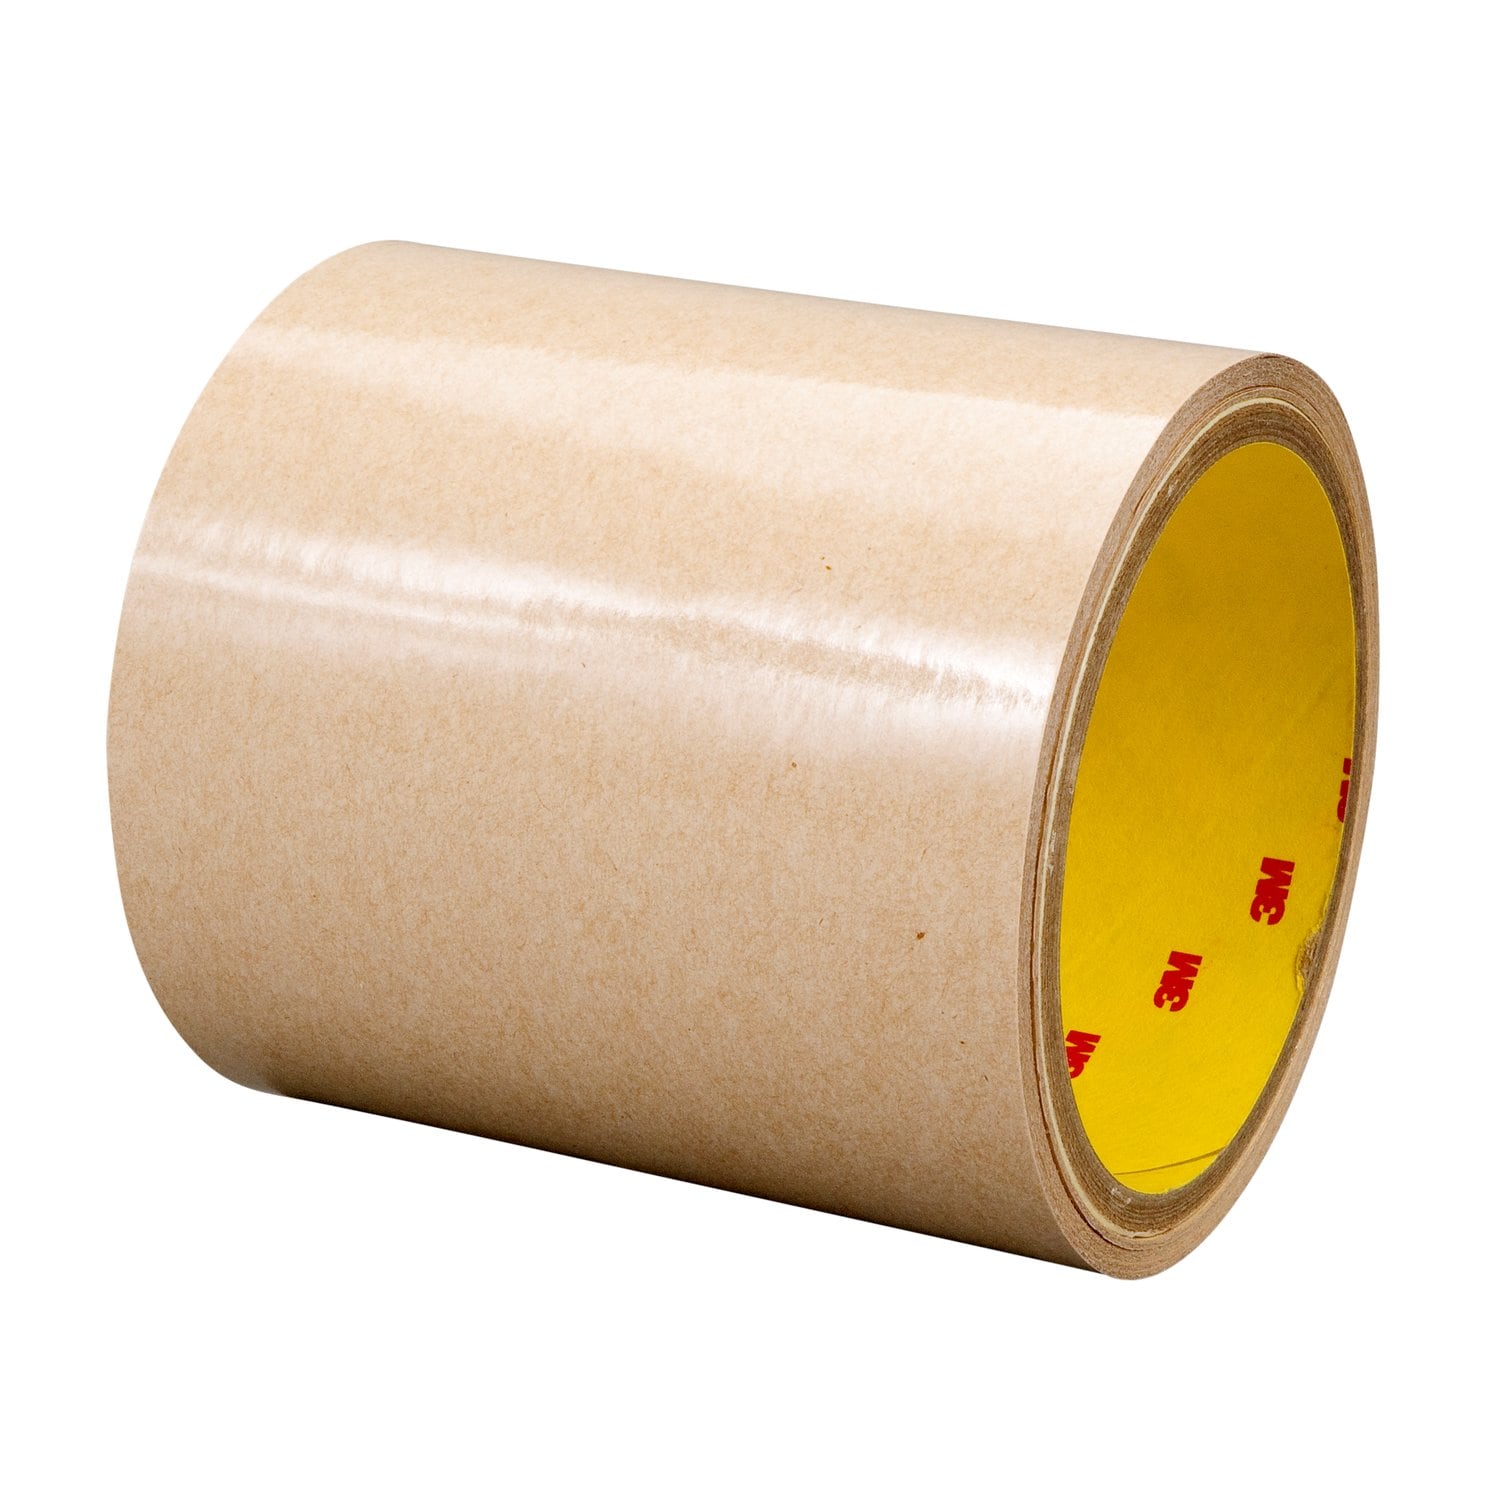 7000001482 - 3M Adhesive Transfer Tape 9626, Clear, 54 in x 60 yd, 2 mil, 1 roll per
case